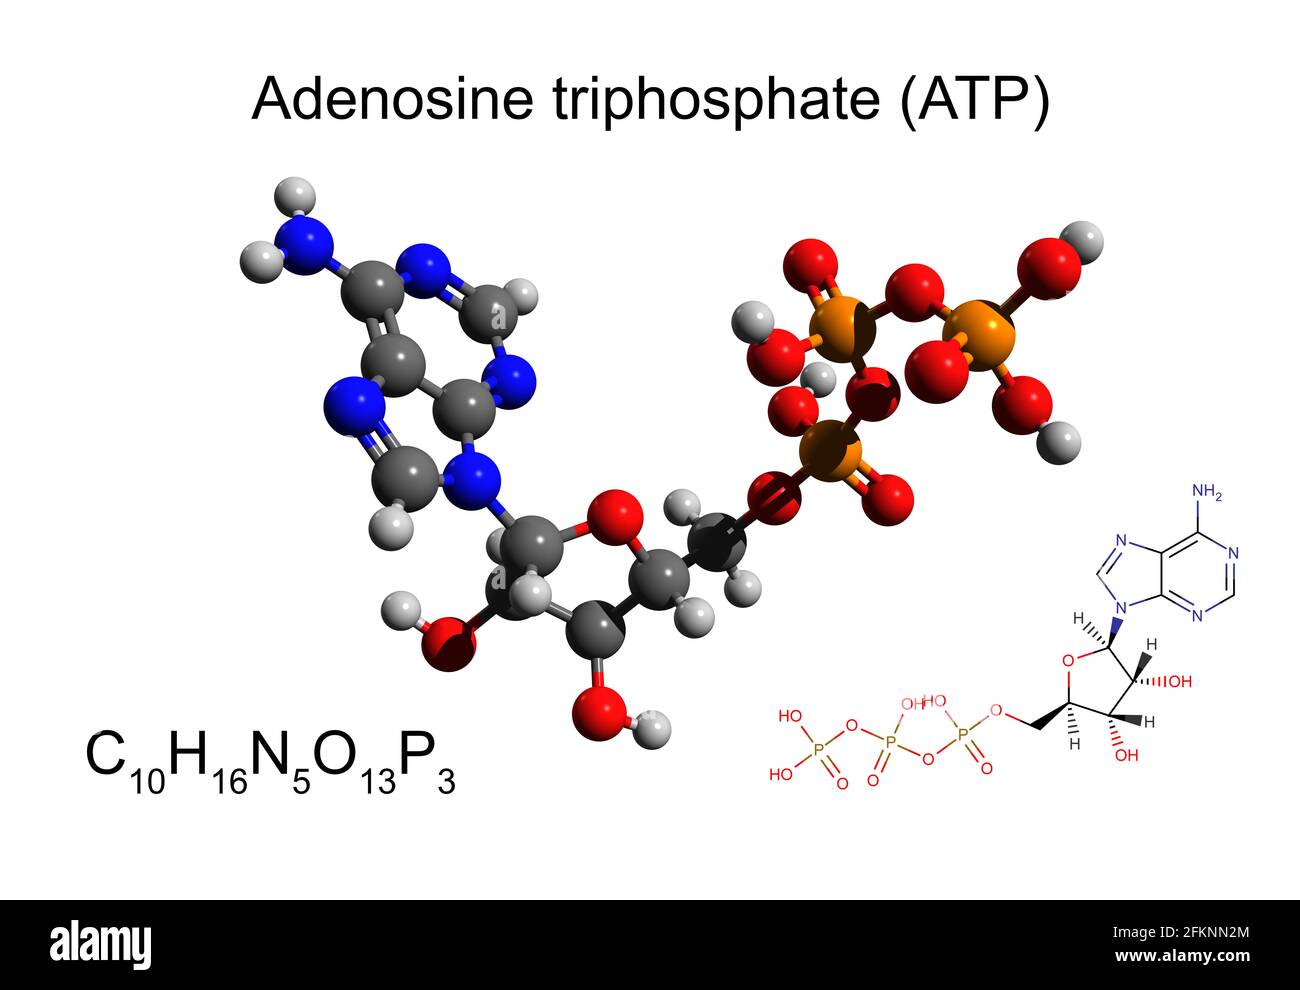 Chemical formula, skeletal formula and 3D ball-and-stick model of adenosine triphosphate (ATP), white background Stock Photo